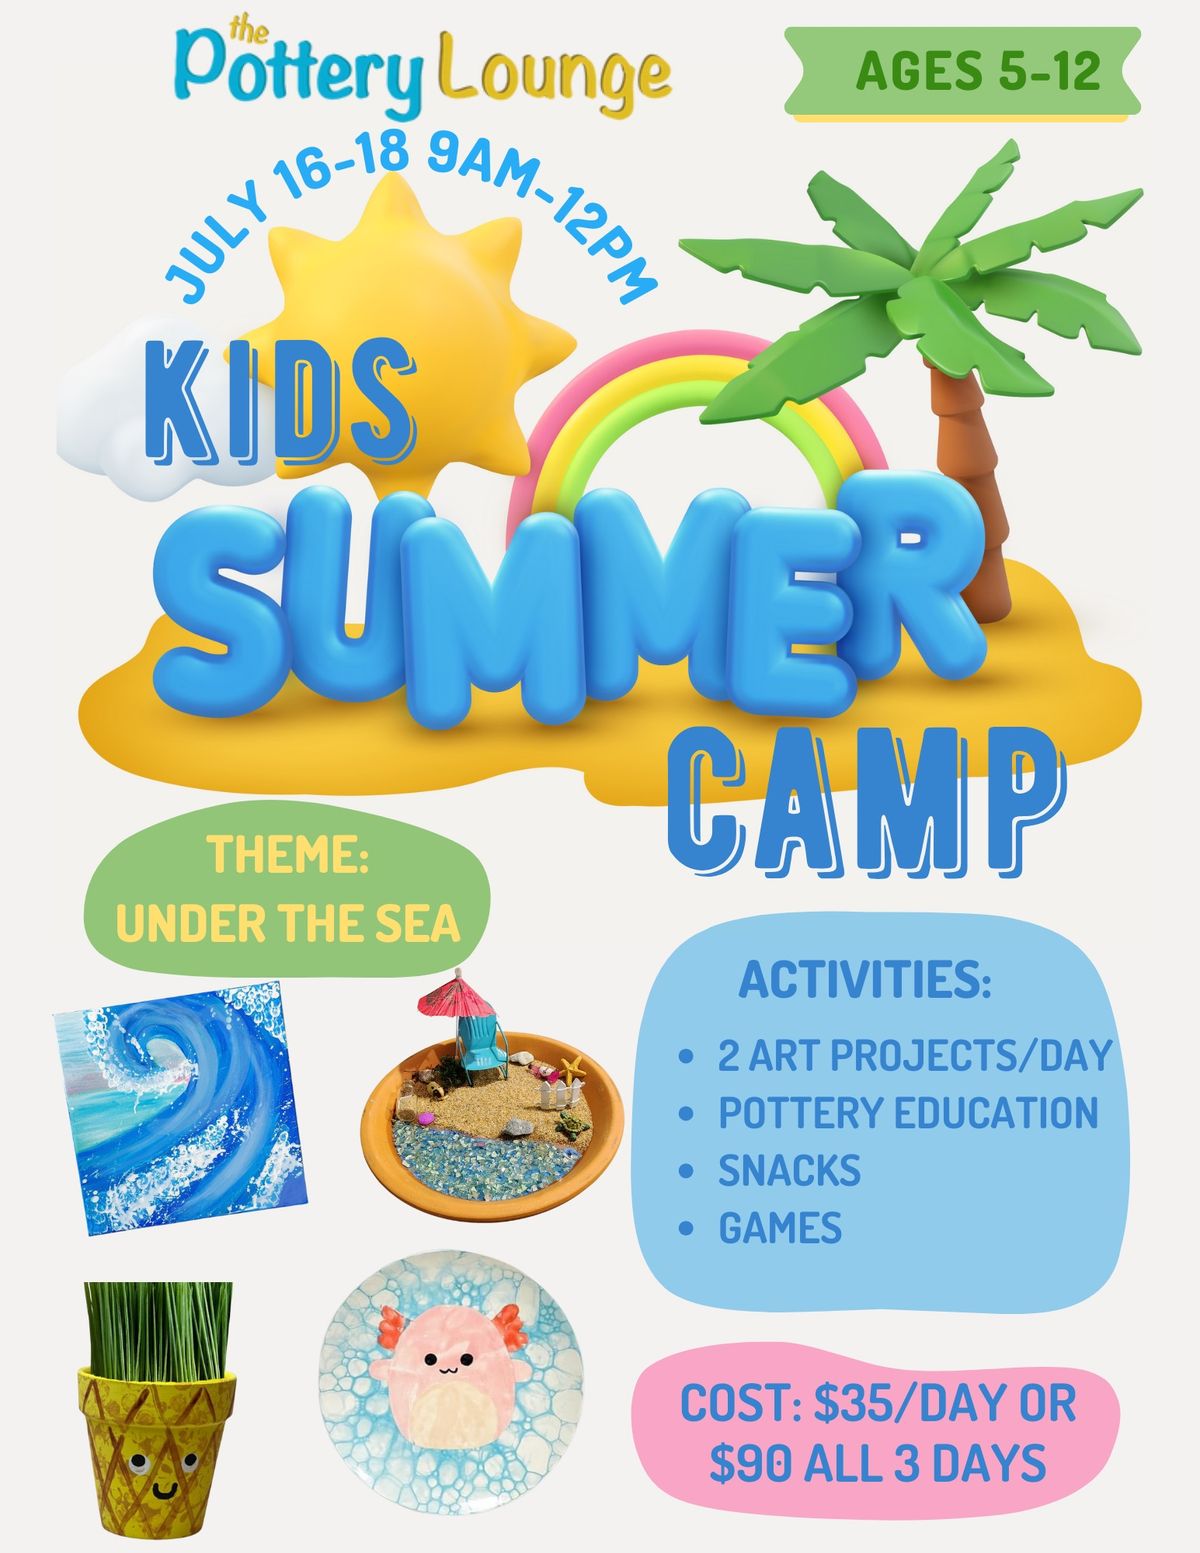 SUMMER POTTERY CAMP: UNDER THE SEA